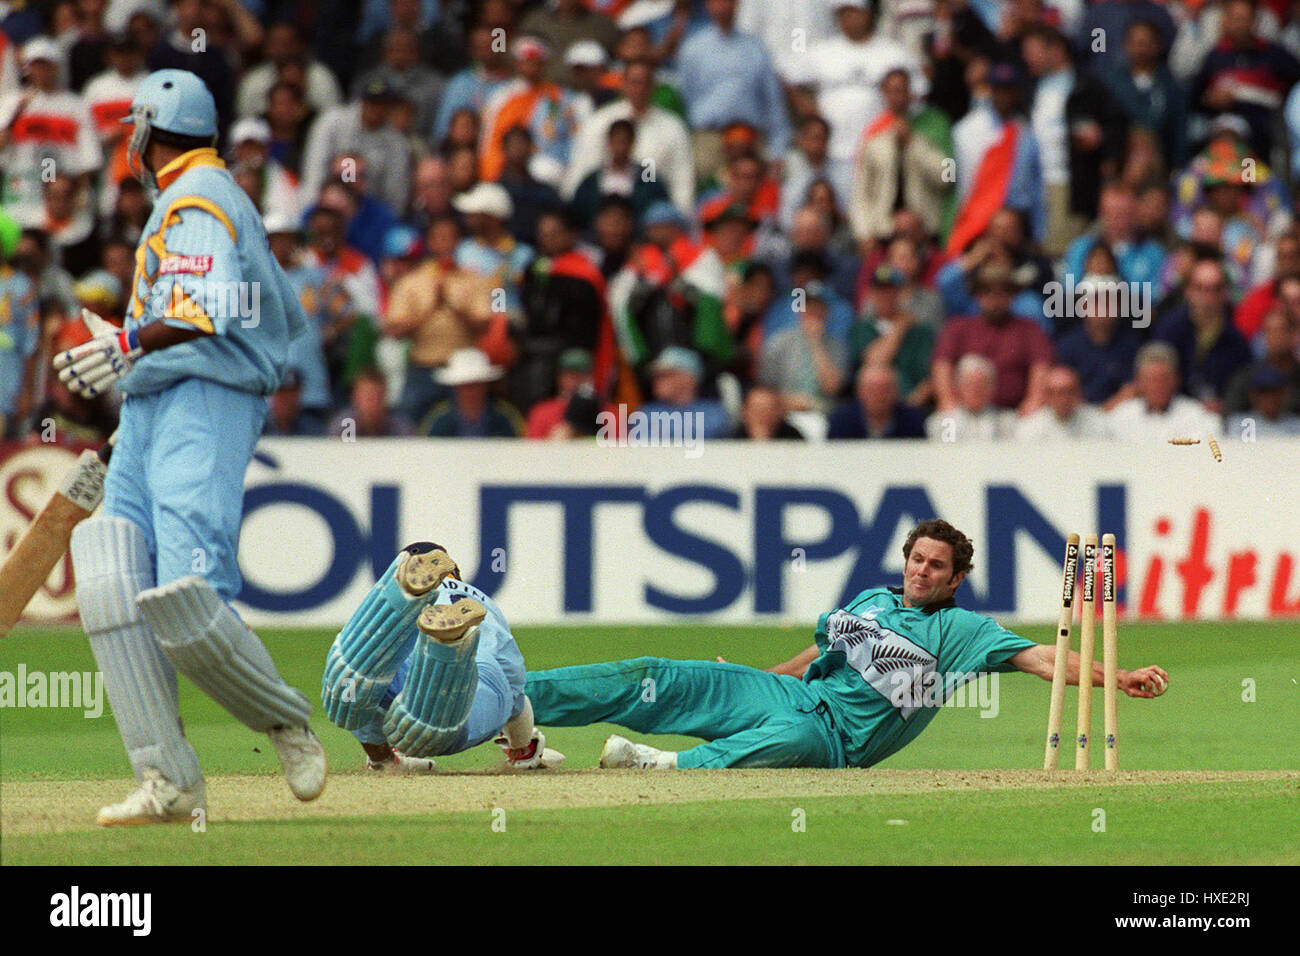 CAIRNS RUNS OUT ROBIN SINGH INDIA V NEW ZEALAND 12 June 1999 Stock Photo